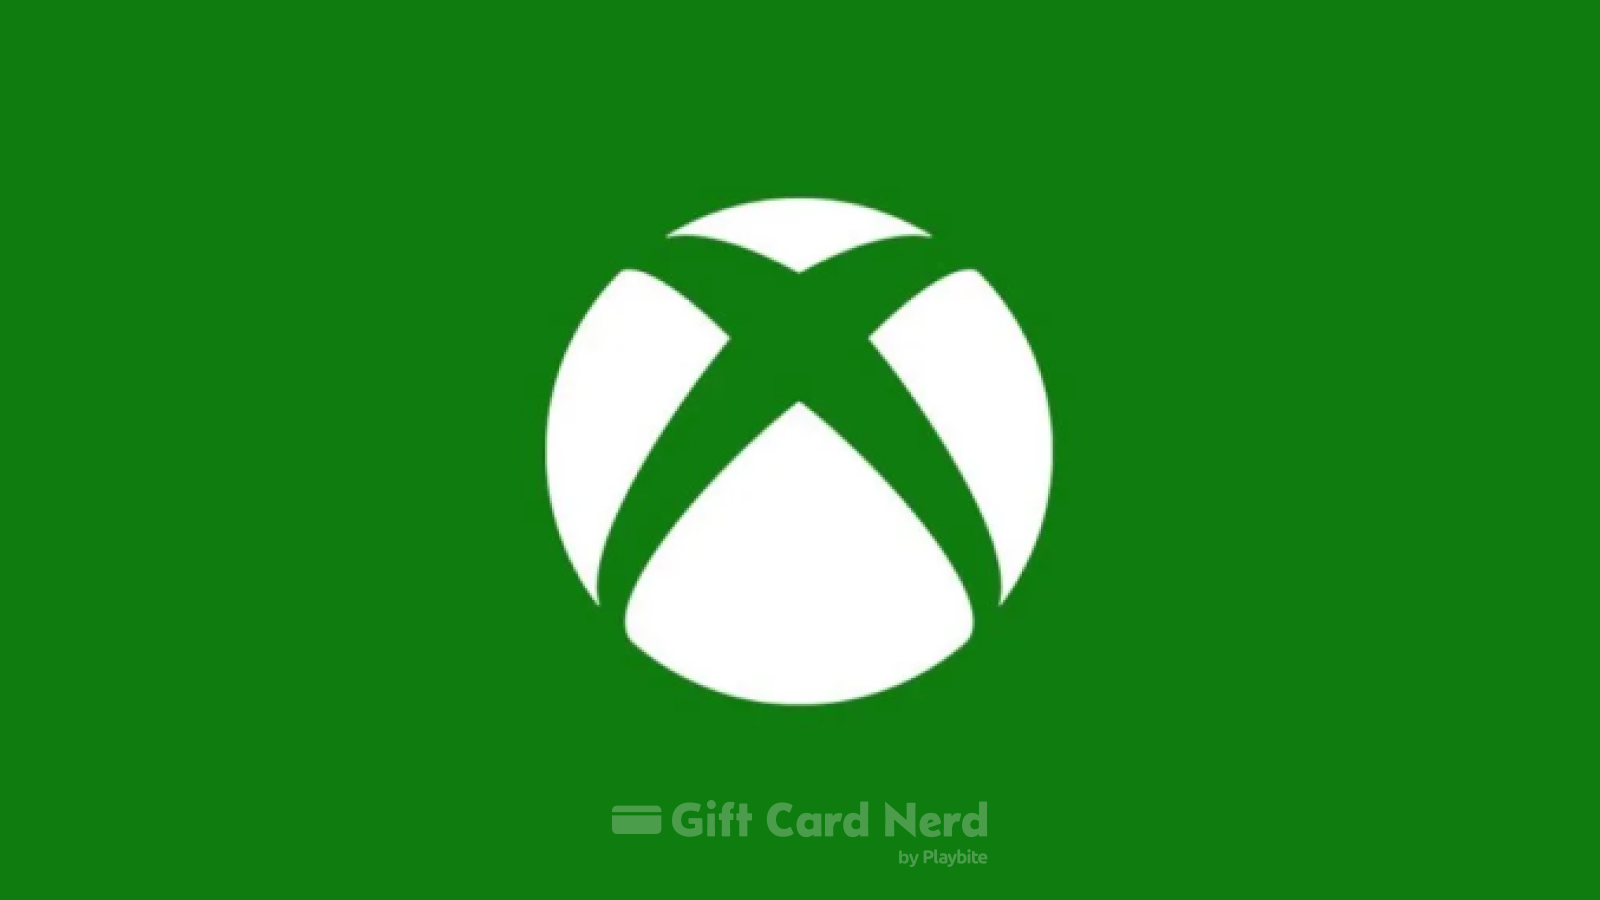 Can Xbox Gift Cards be Used on Venmo?